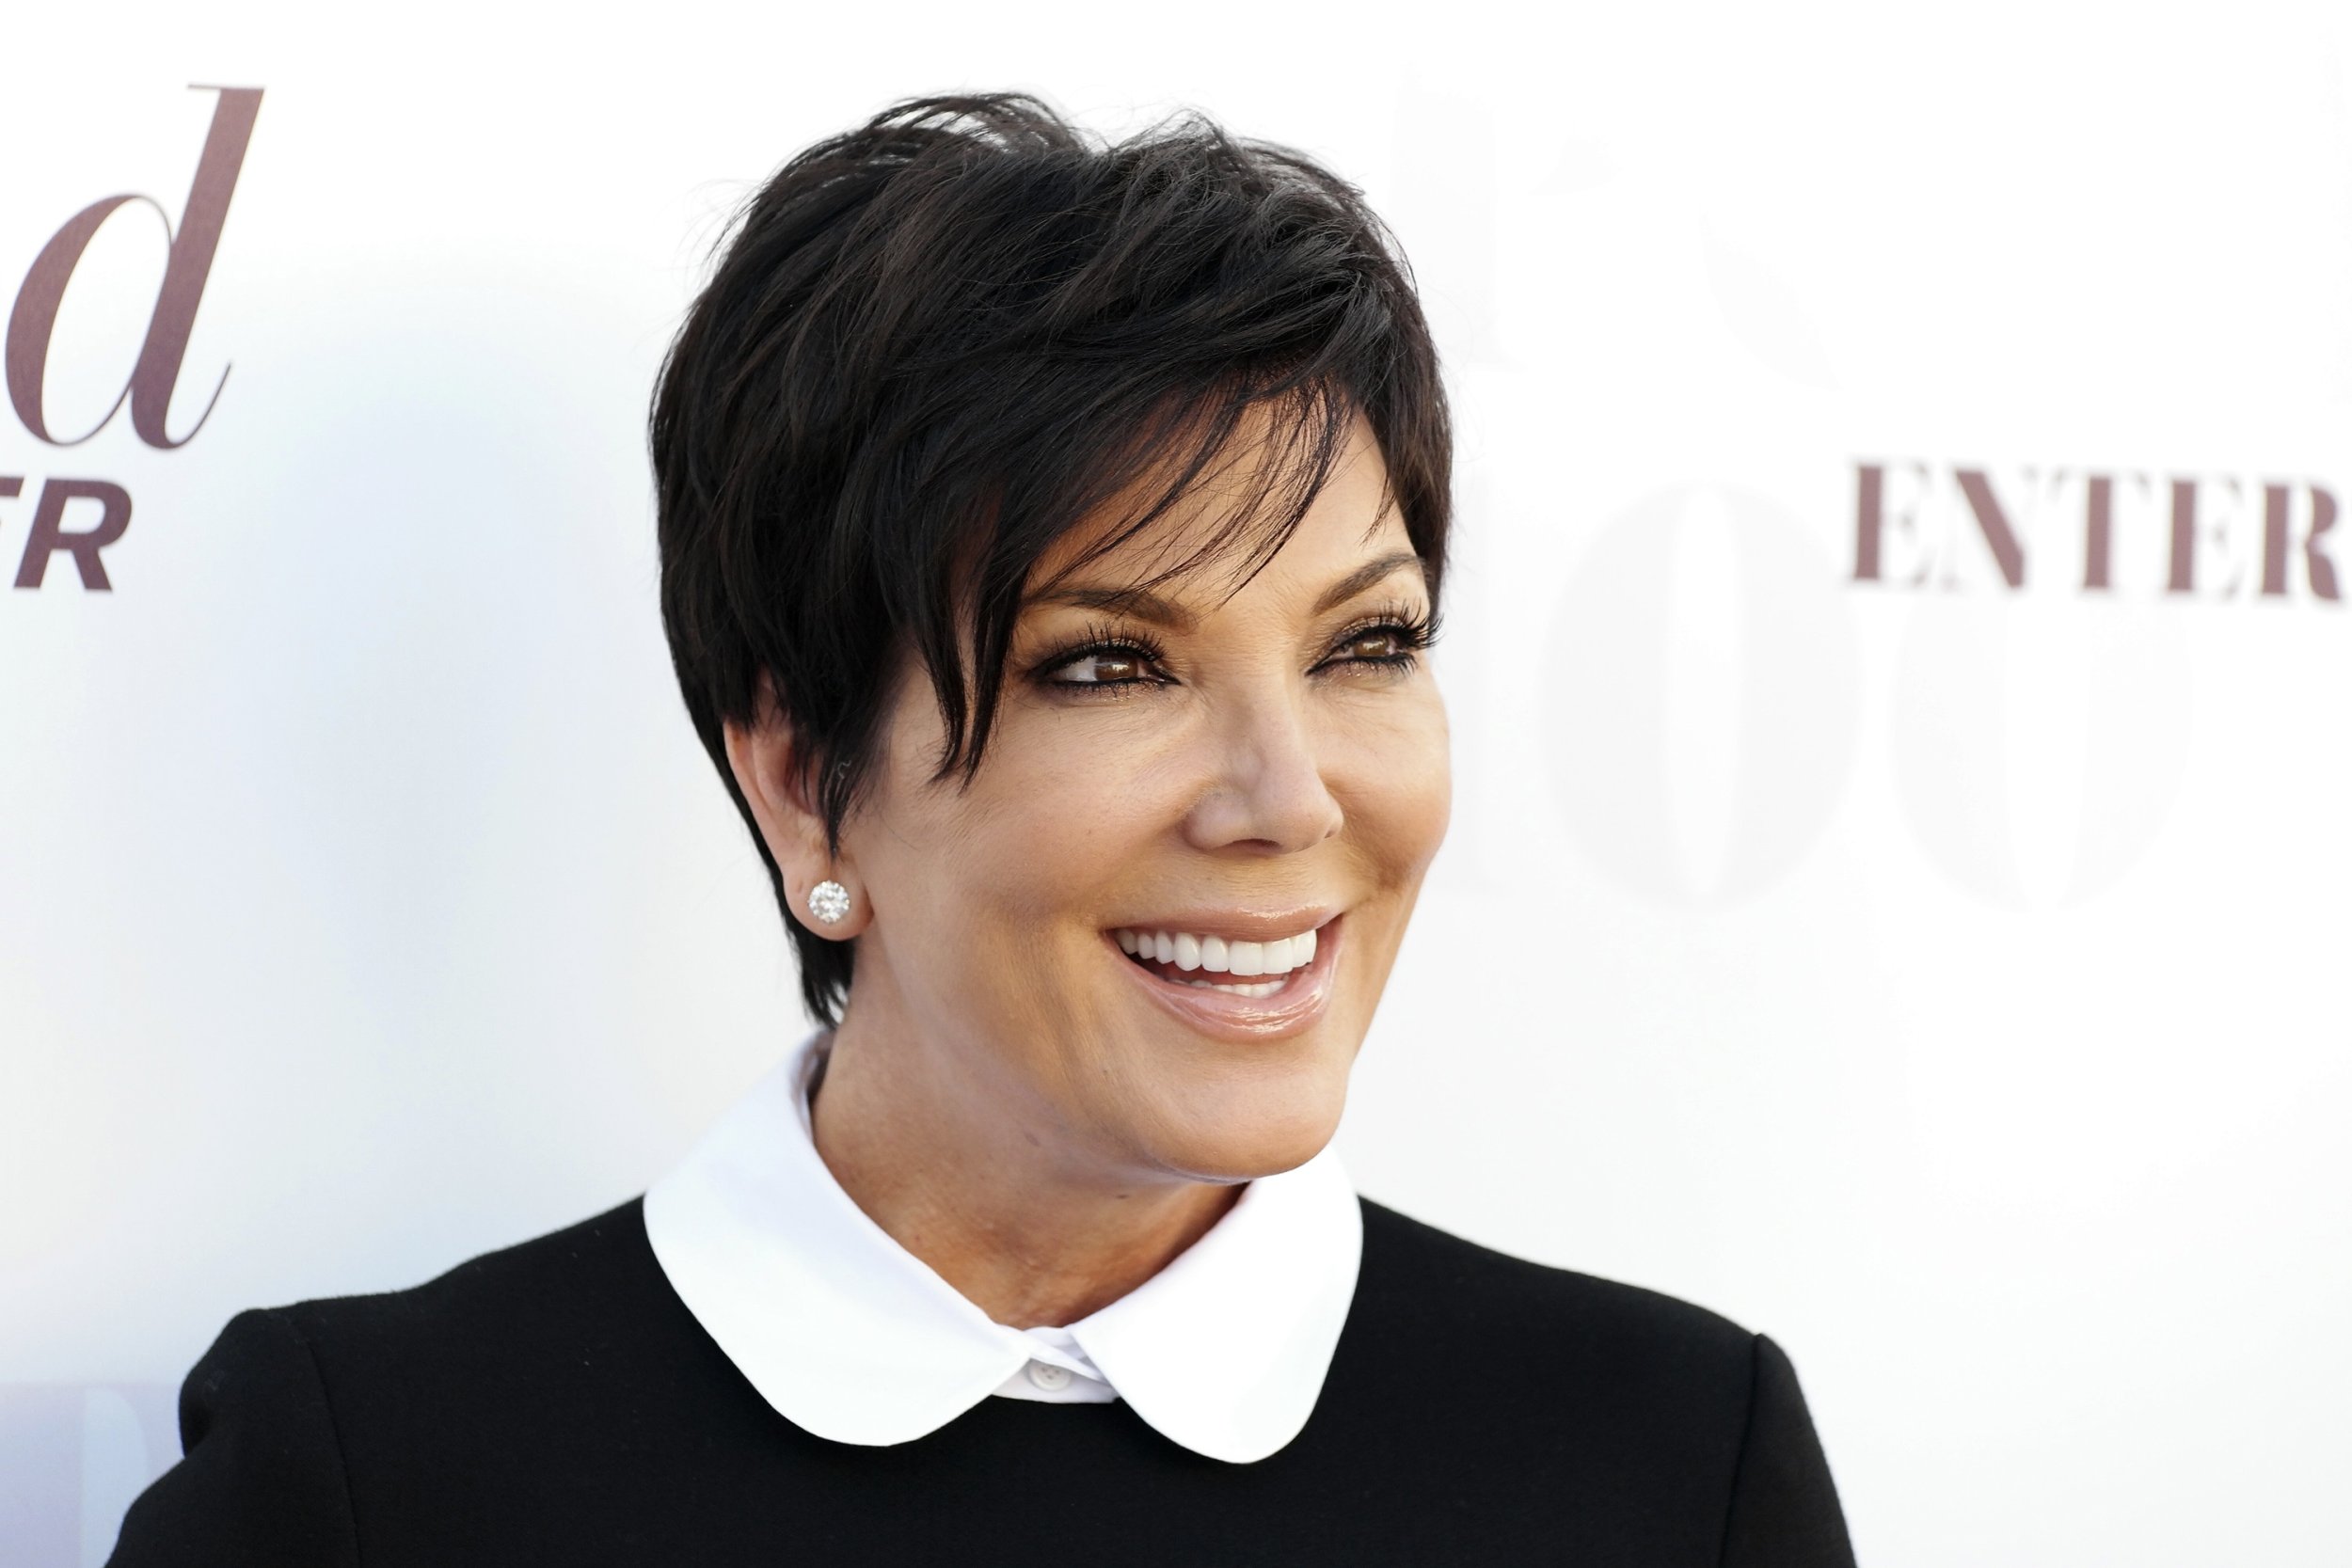 Kris Jenner Talks About Bruce Jenner Becoming A Woman In New Keeping Up With The Kardashians